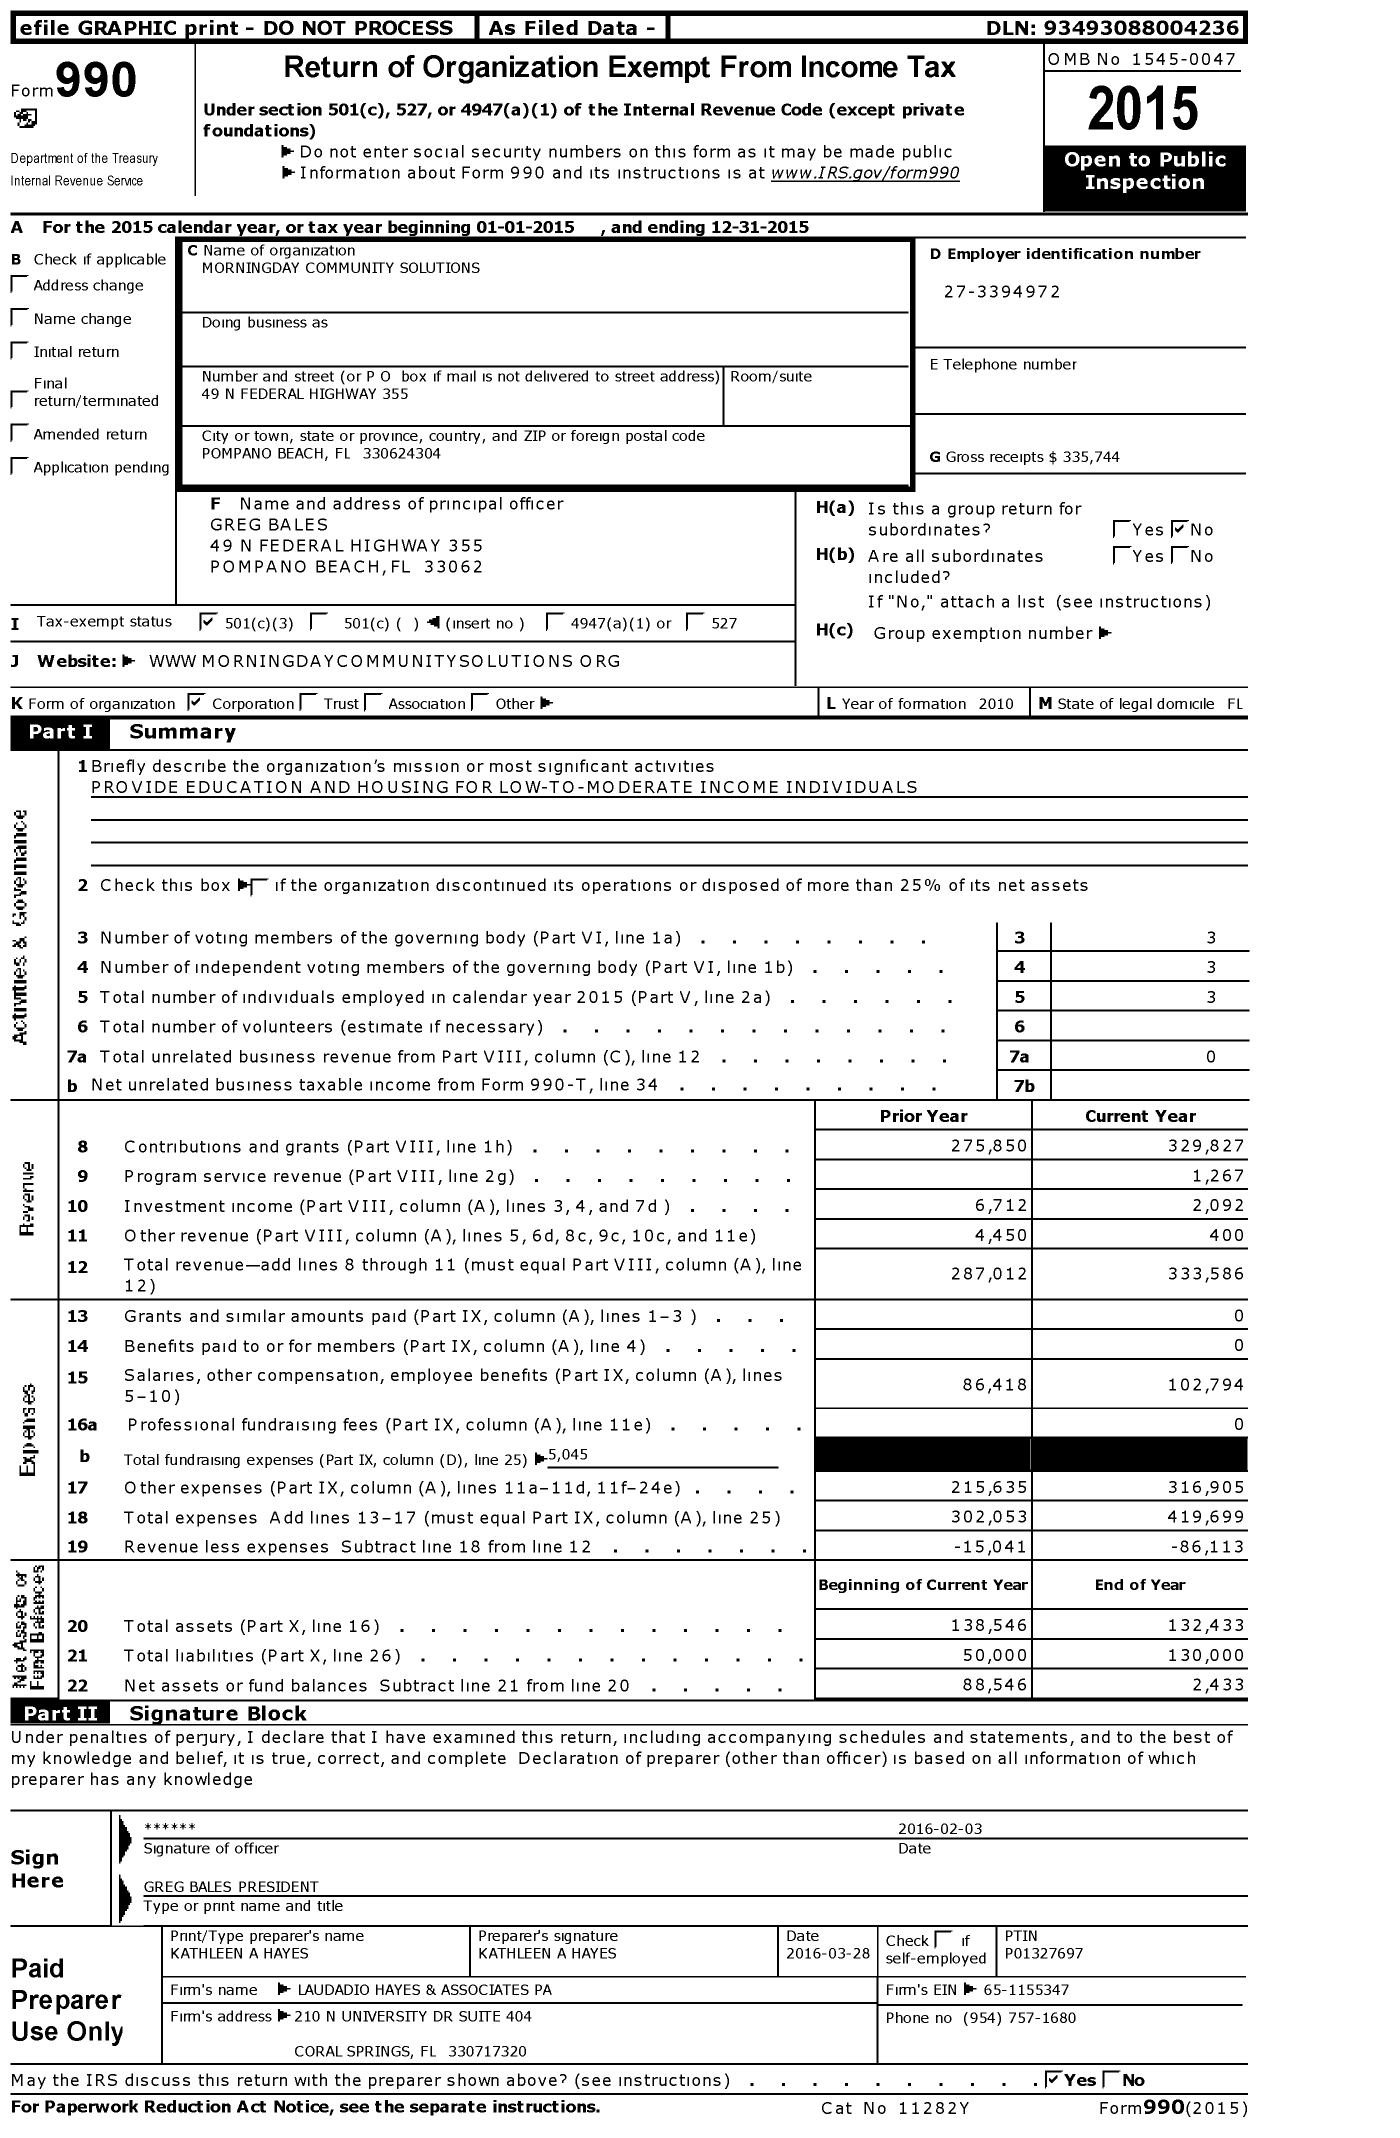 Image of first page of 2015 Form 990 for Morningday Community Solutions